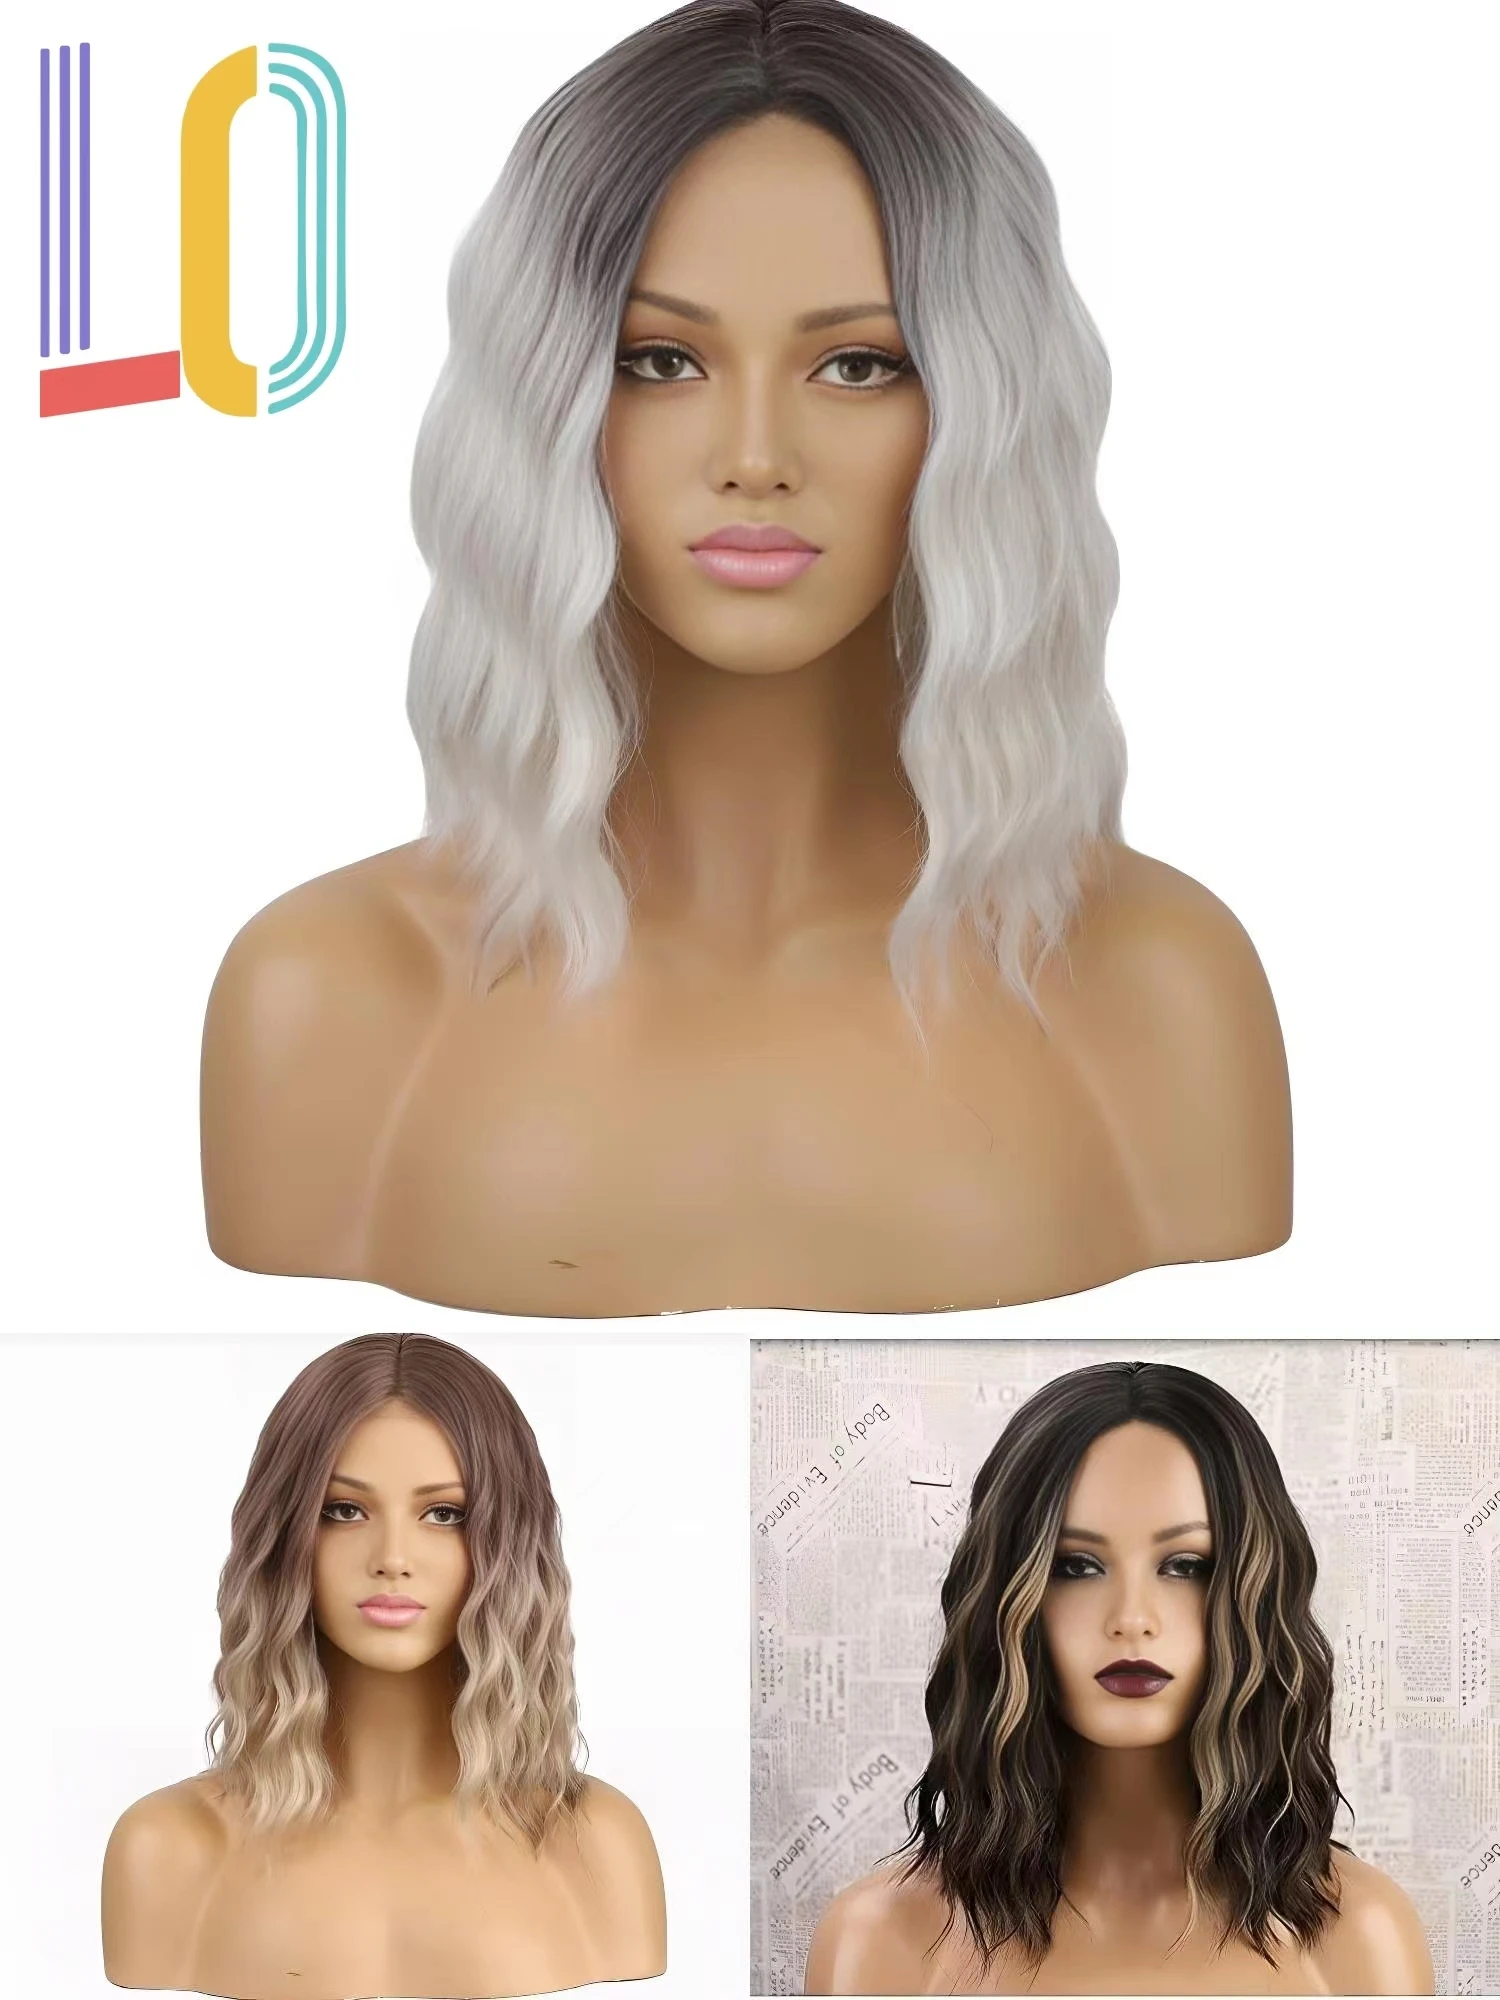 LO synthetic wig front lace short curly wig 15 inch short hair blonde wig mixed light grey brown daily wear party wigs for women